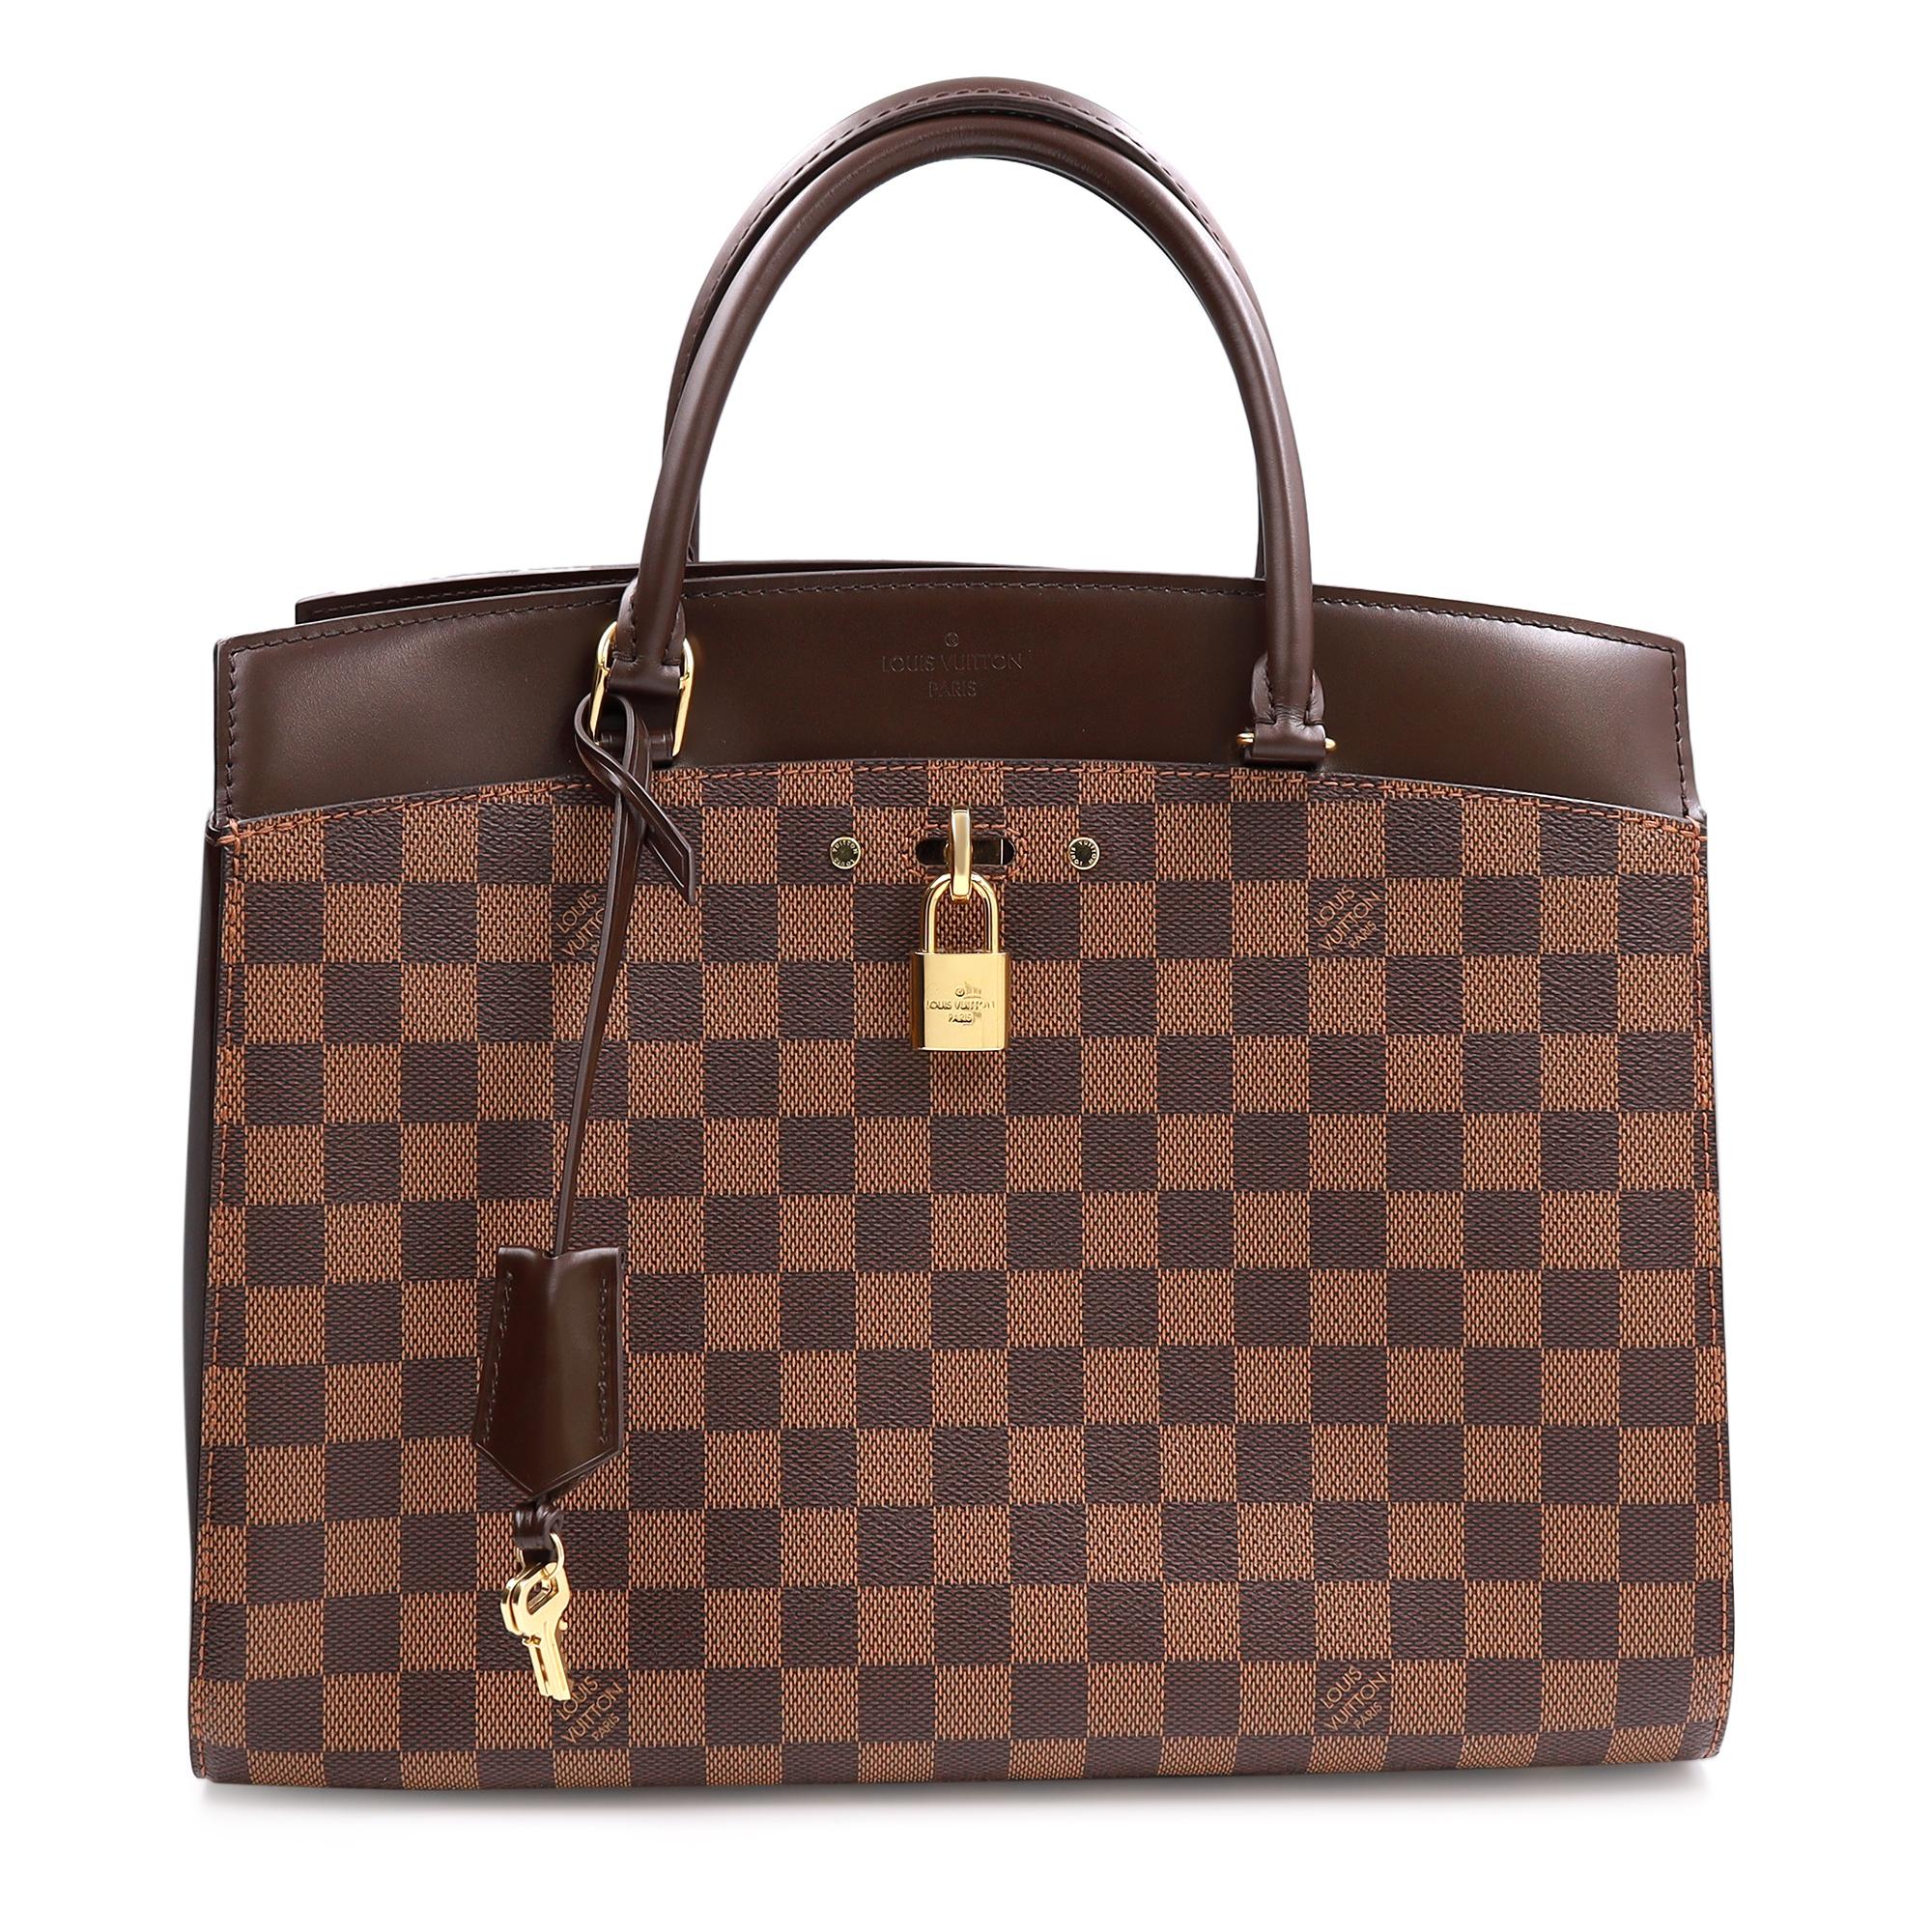 Louis Vuitton Damier Ebene Rivoli MM Brown Tote Handbag. Featuring Damier Ebene checked coated canvas, trimmed with smooth brown leather. Two rolled leather top handles with a detachable strap. Gold tone hardware. Interior zip compartment with three